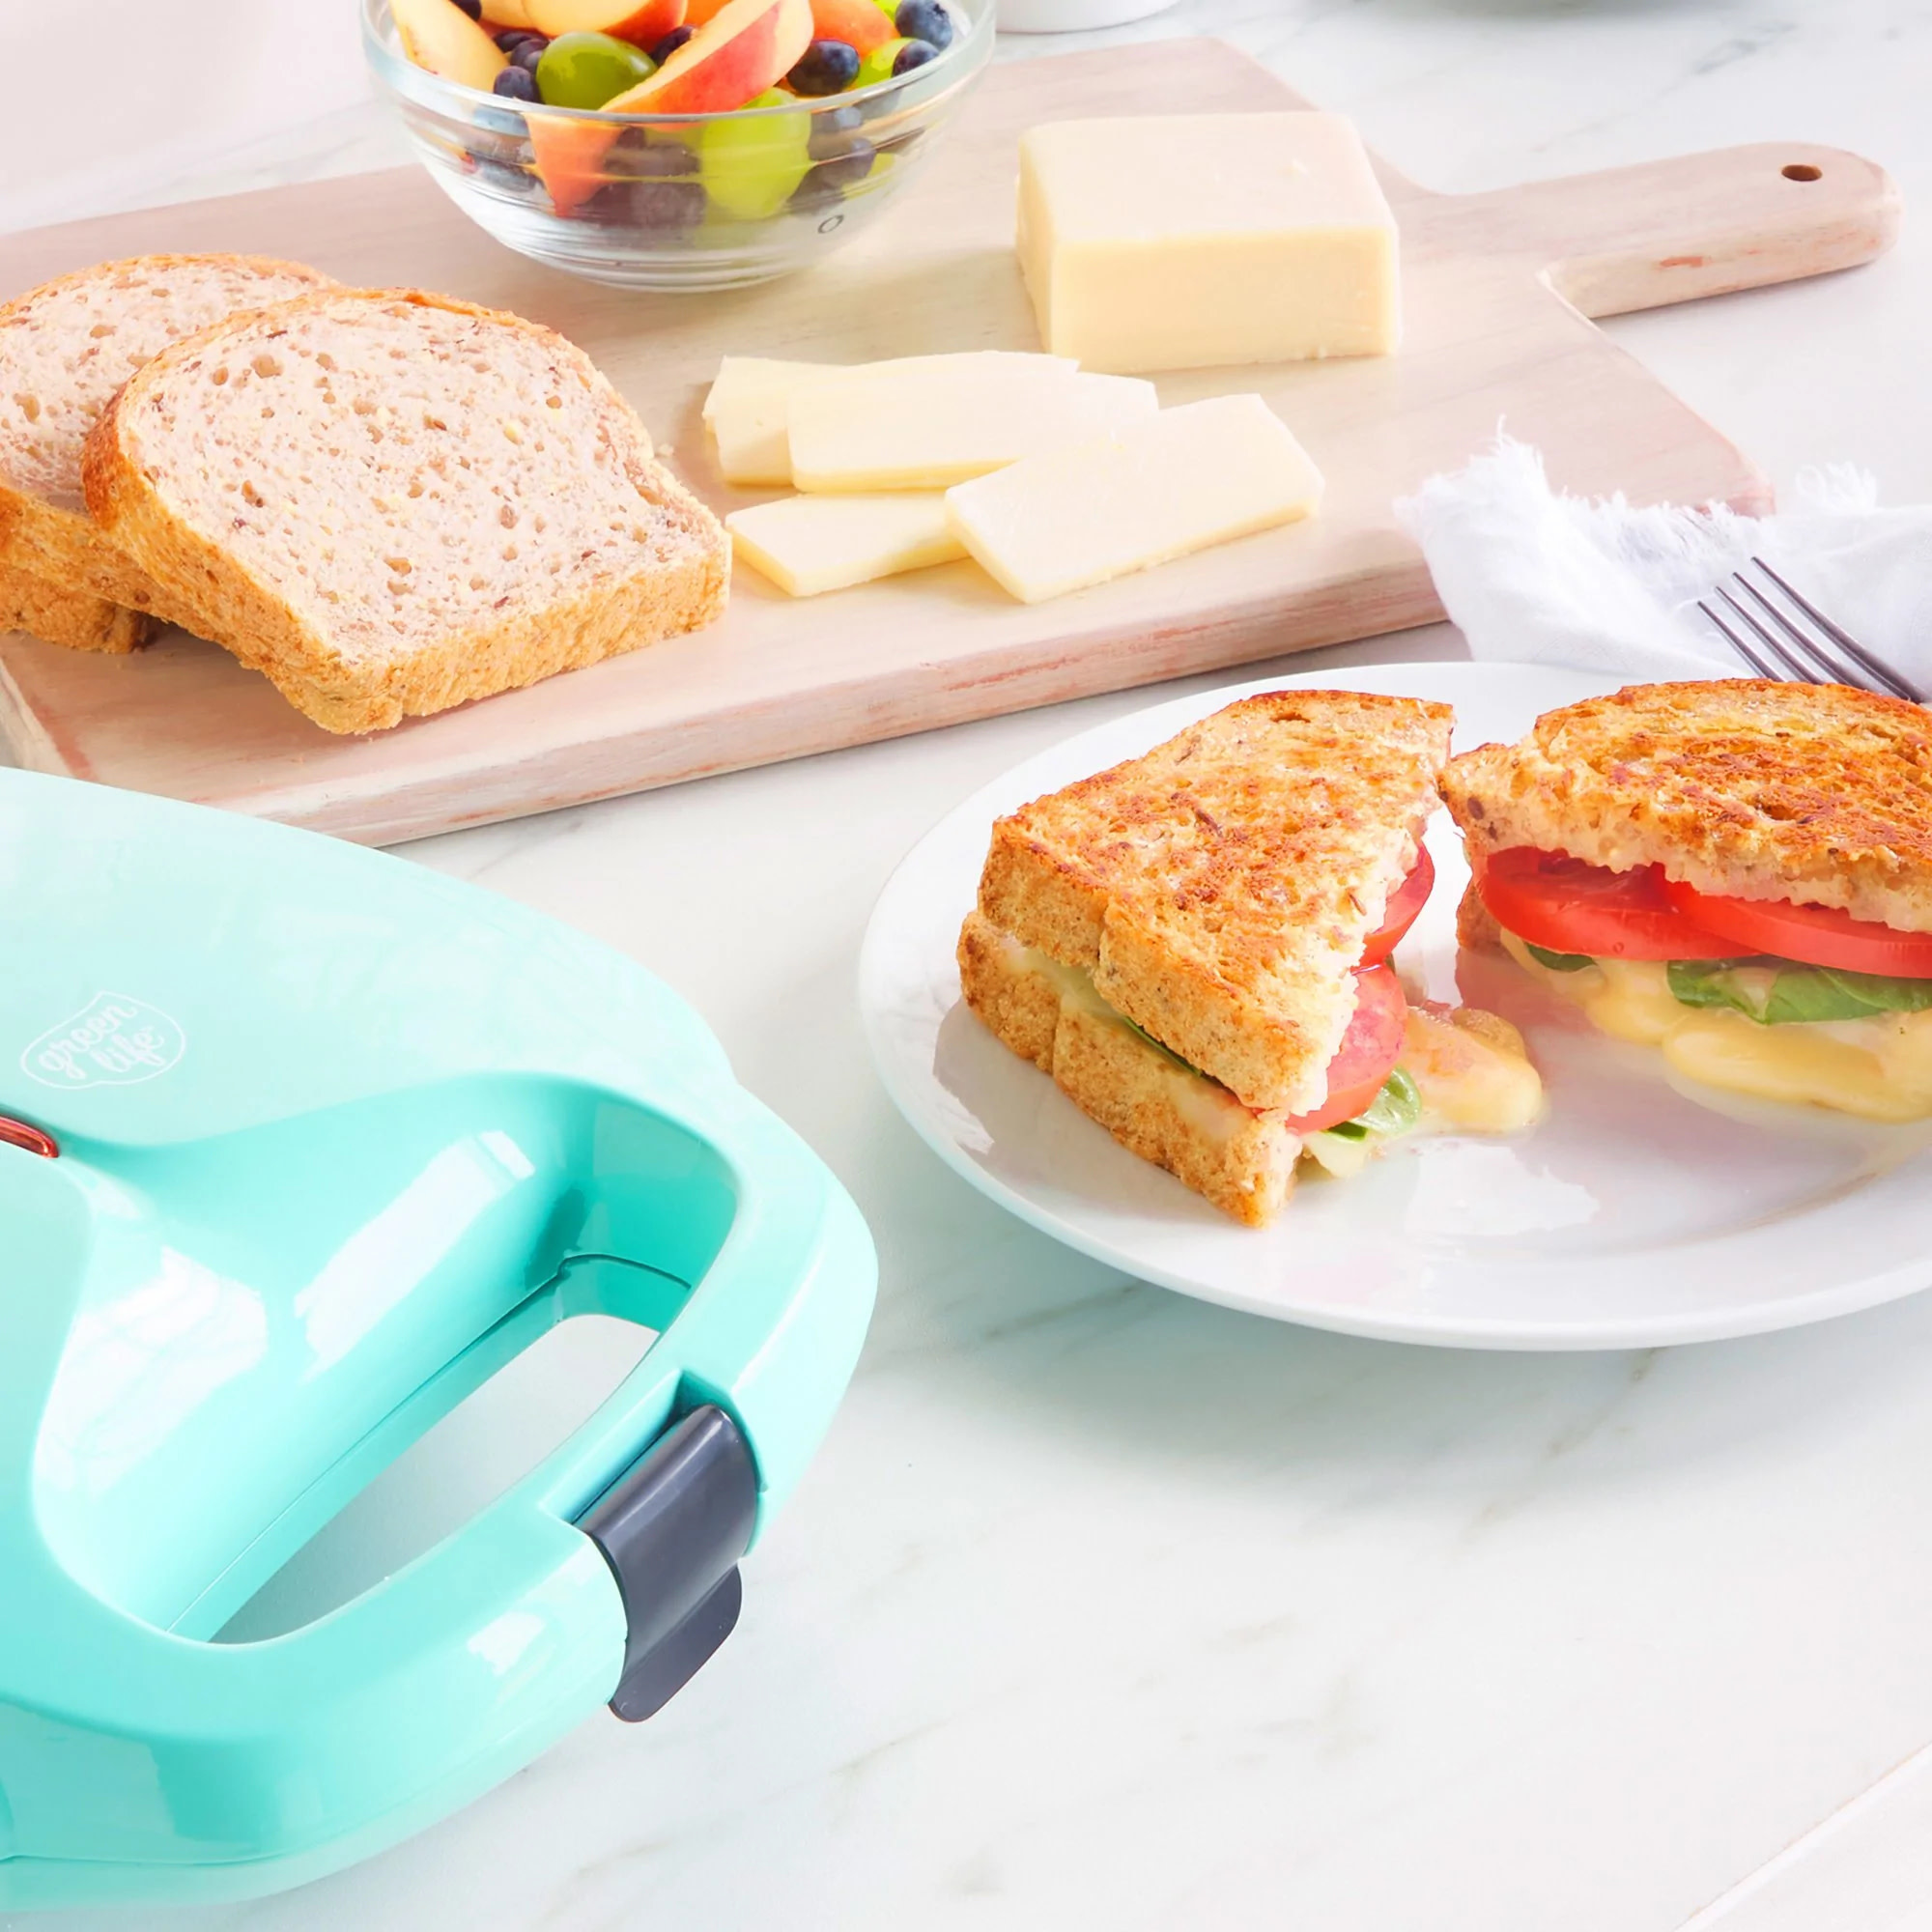  Greenlife Turquoise Ceramic Electric Sandwich Maker (Pink):  Home & Kitchen